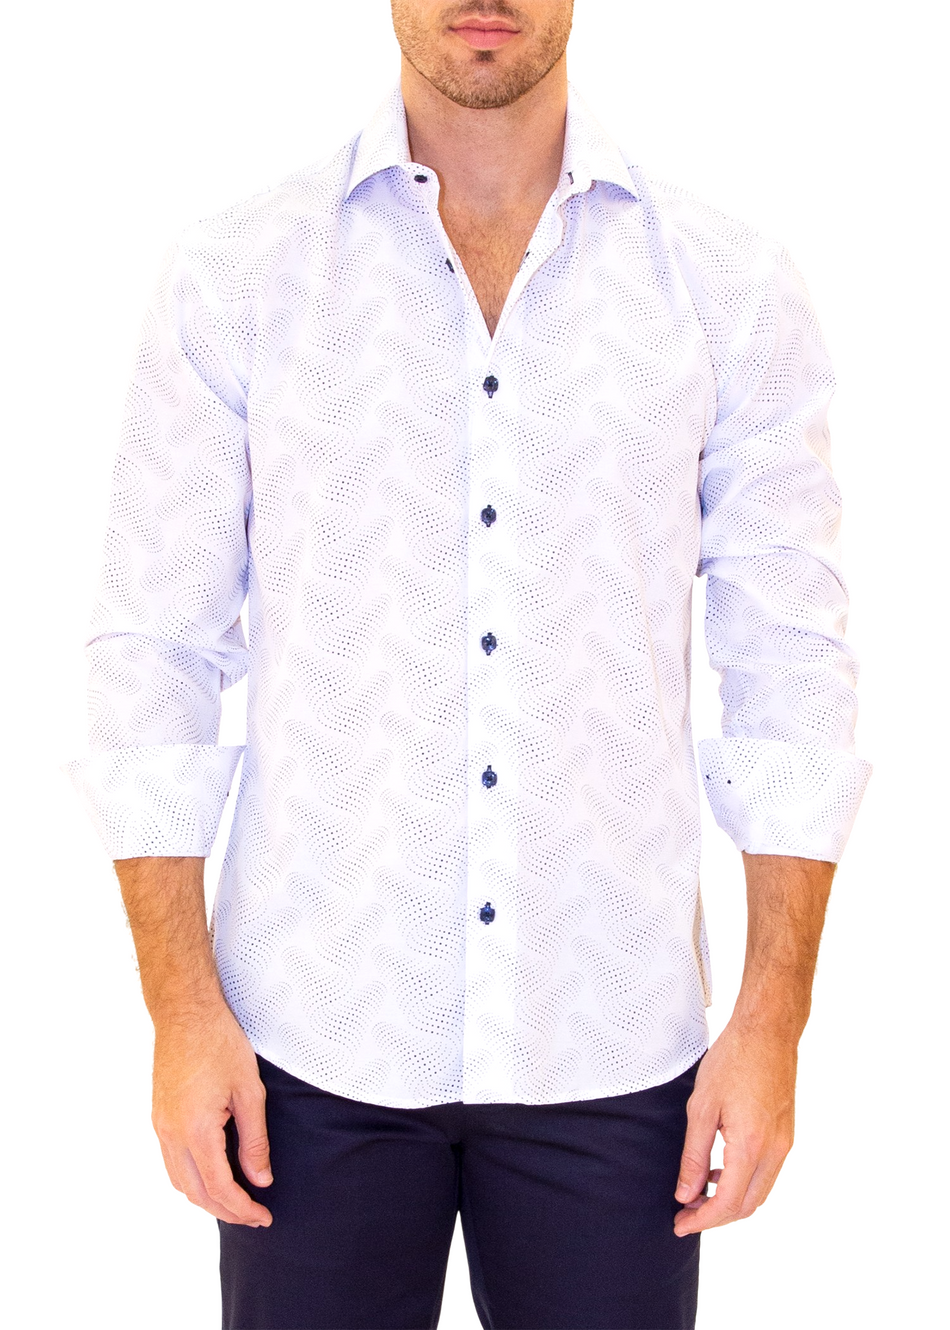 White Abstract Halftone Effect Dotted Wave Print Long Sleeve Dress Shirt